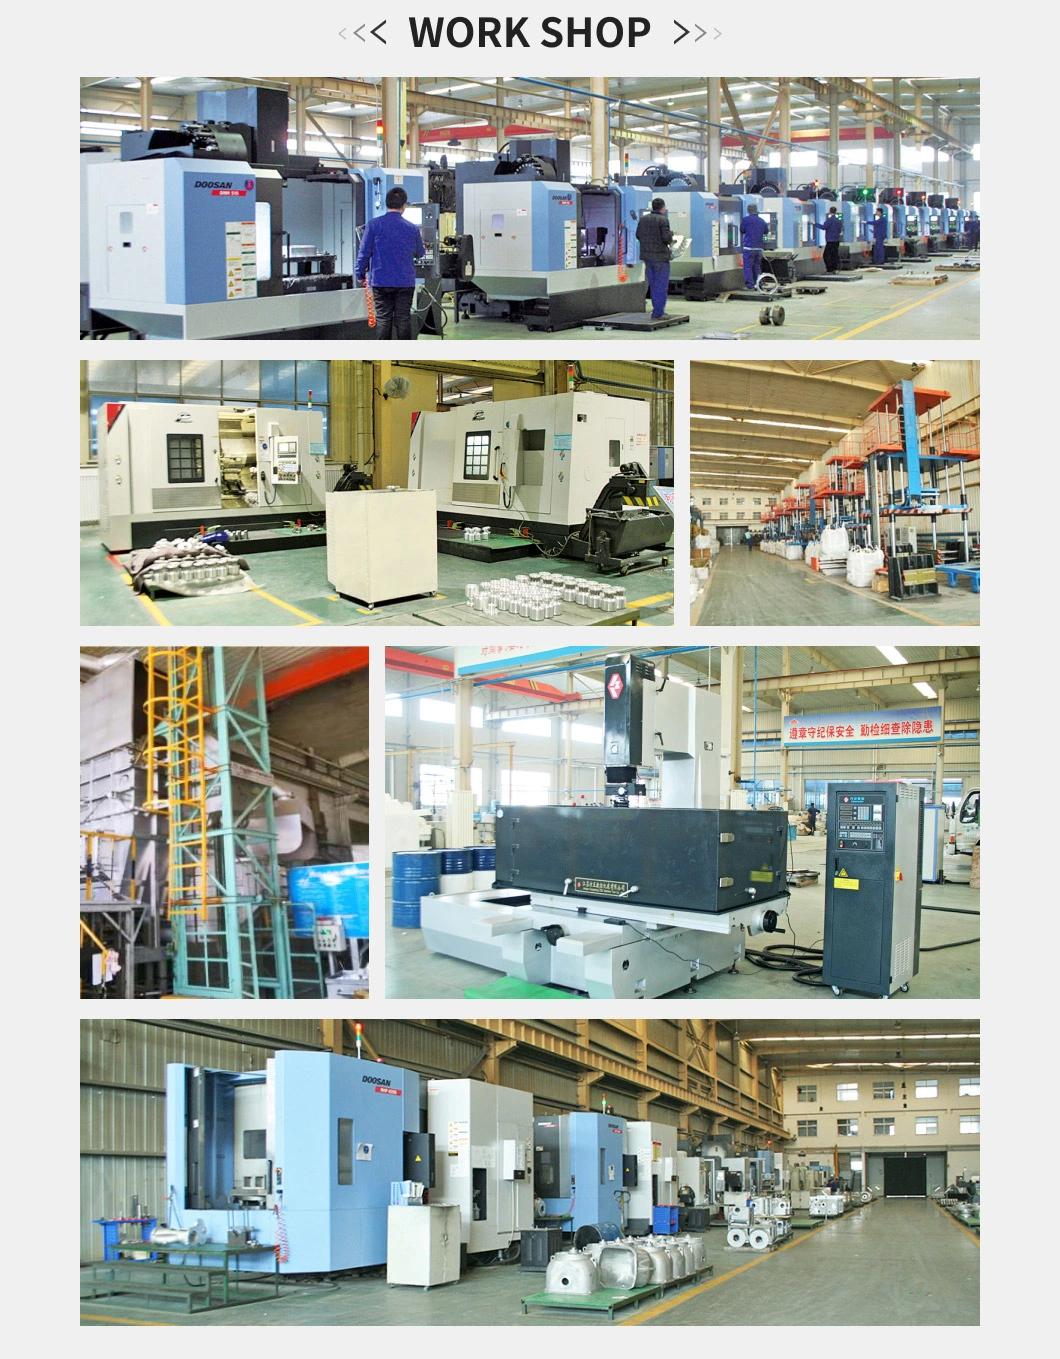 Takai OEM and ODM Customized Aluminum Casting for Mold CNC Machining Manufacturer